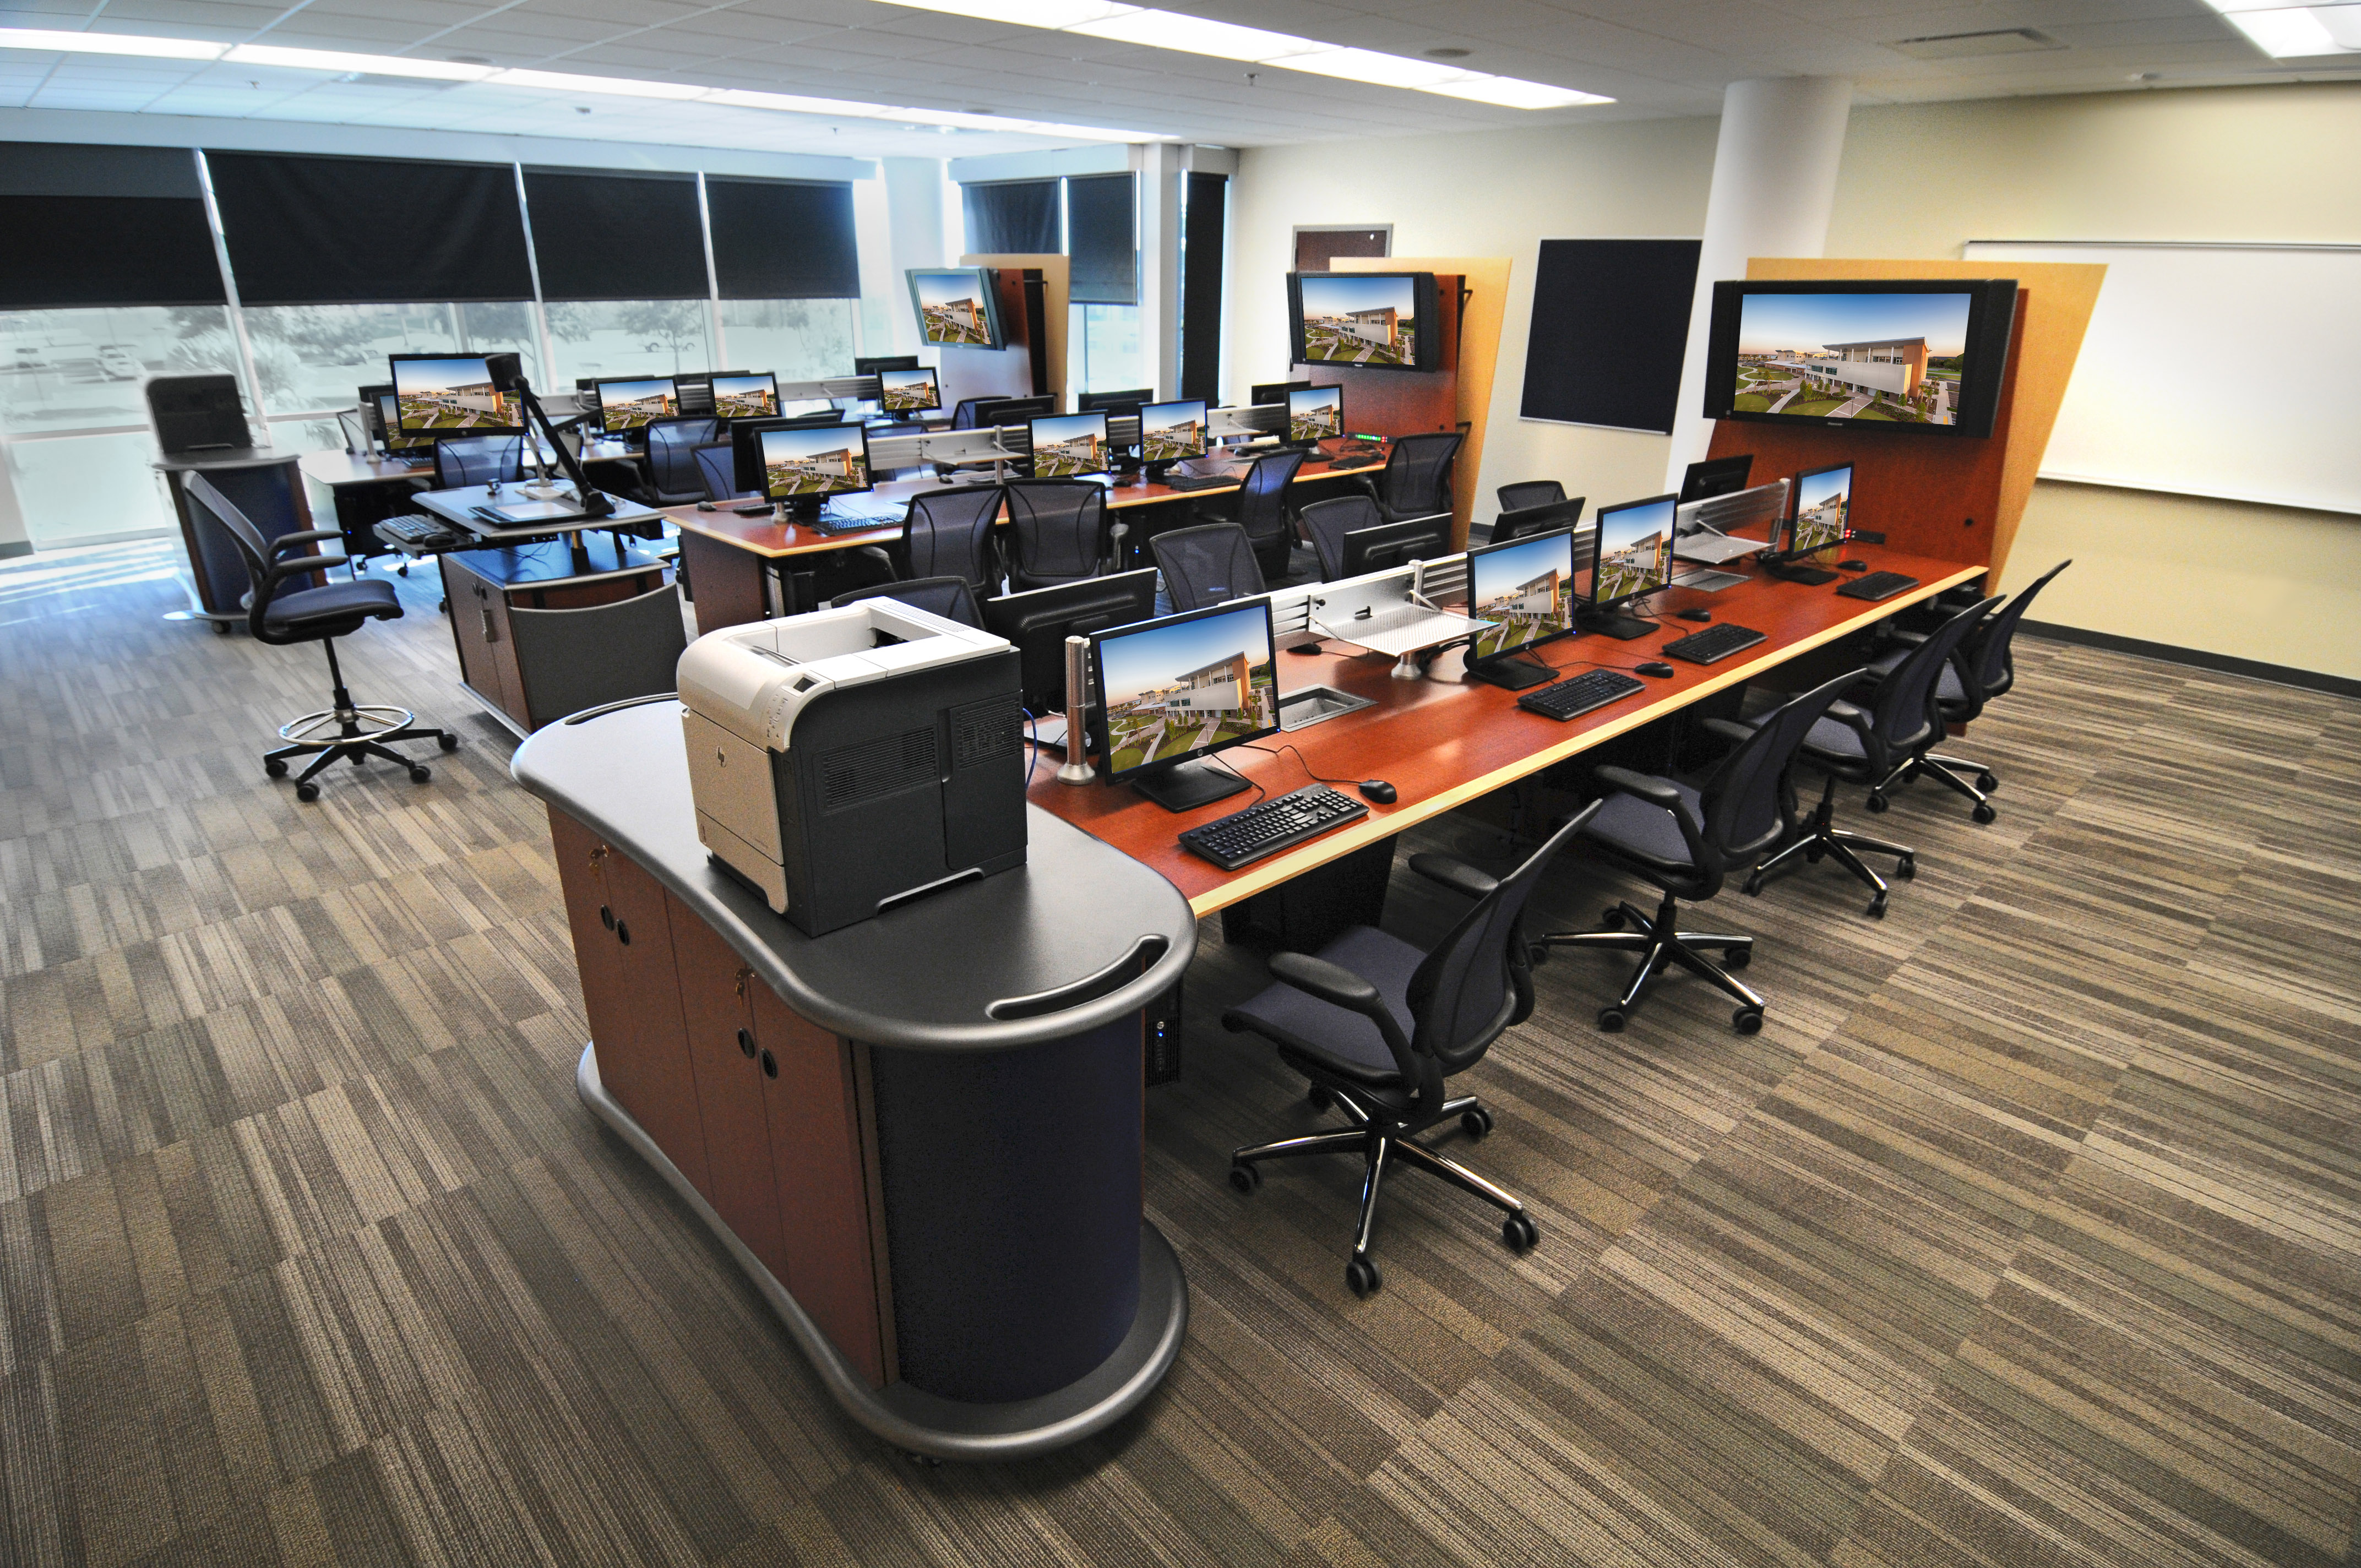 Wendy Payne's Classroom features Vista Technology Clusters by SMARTdesks